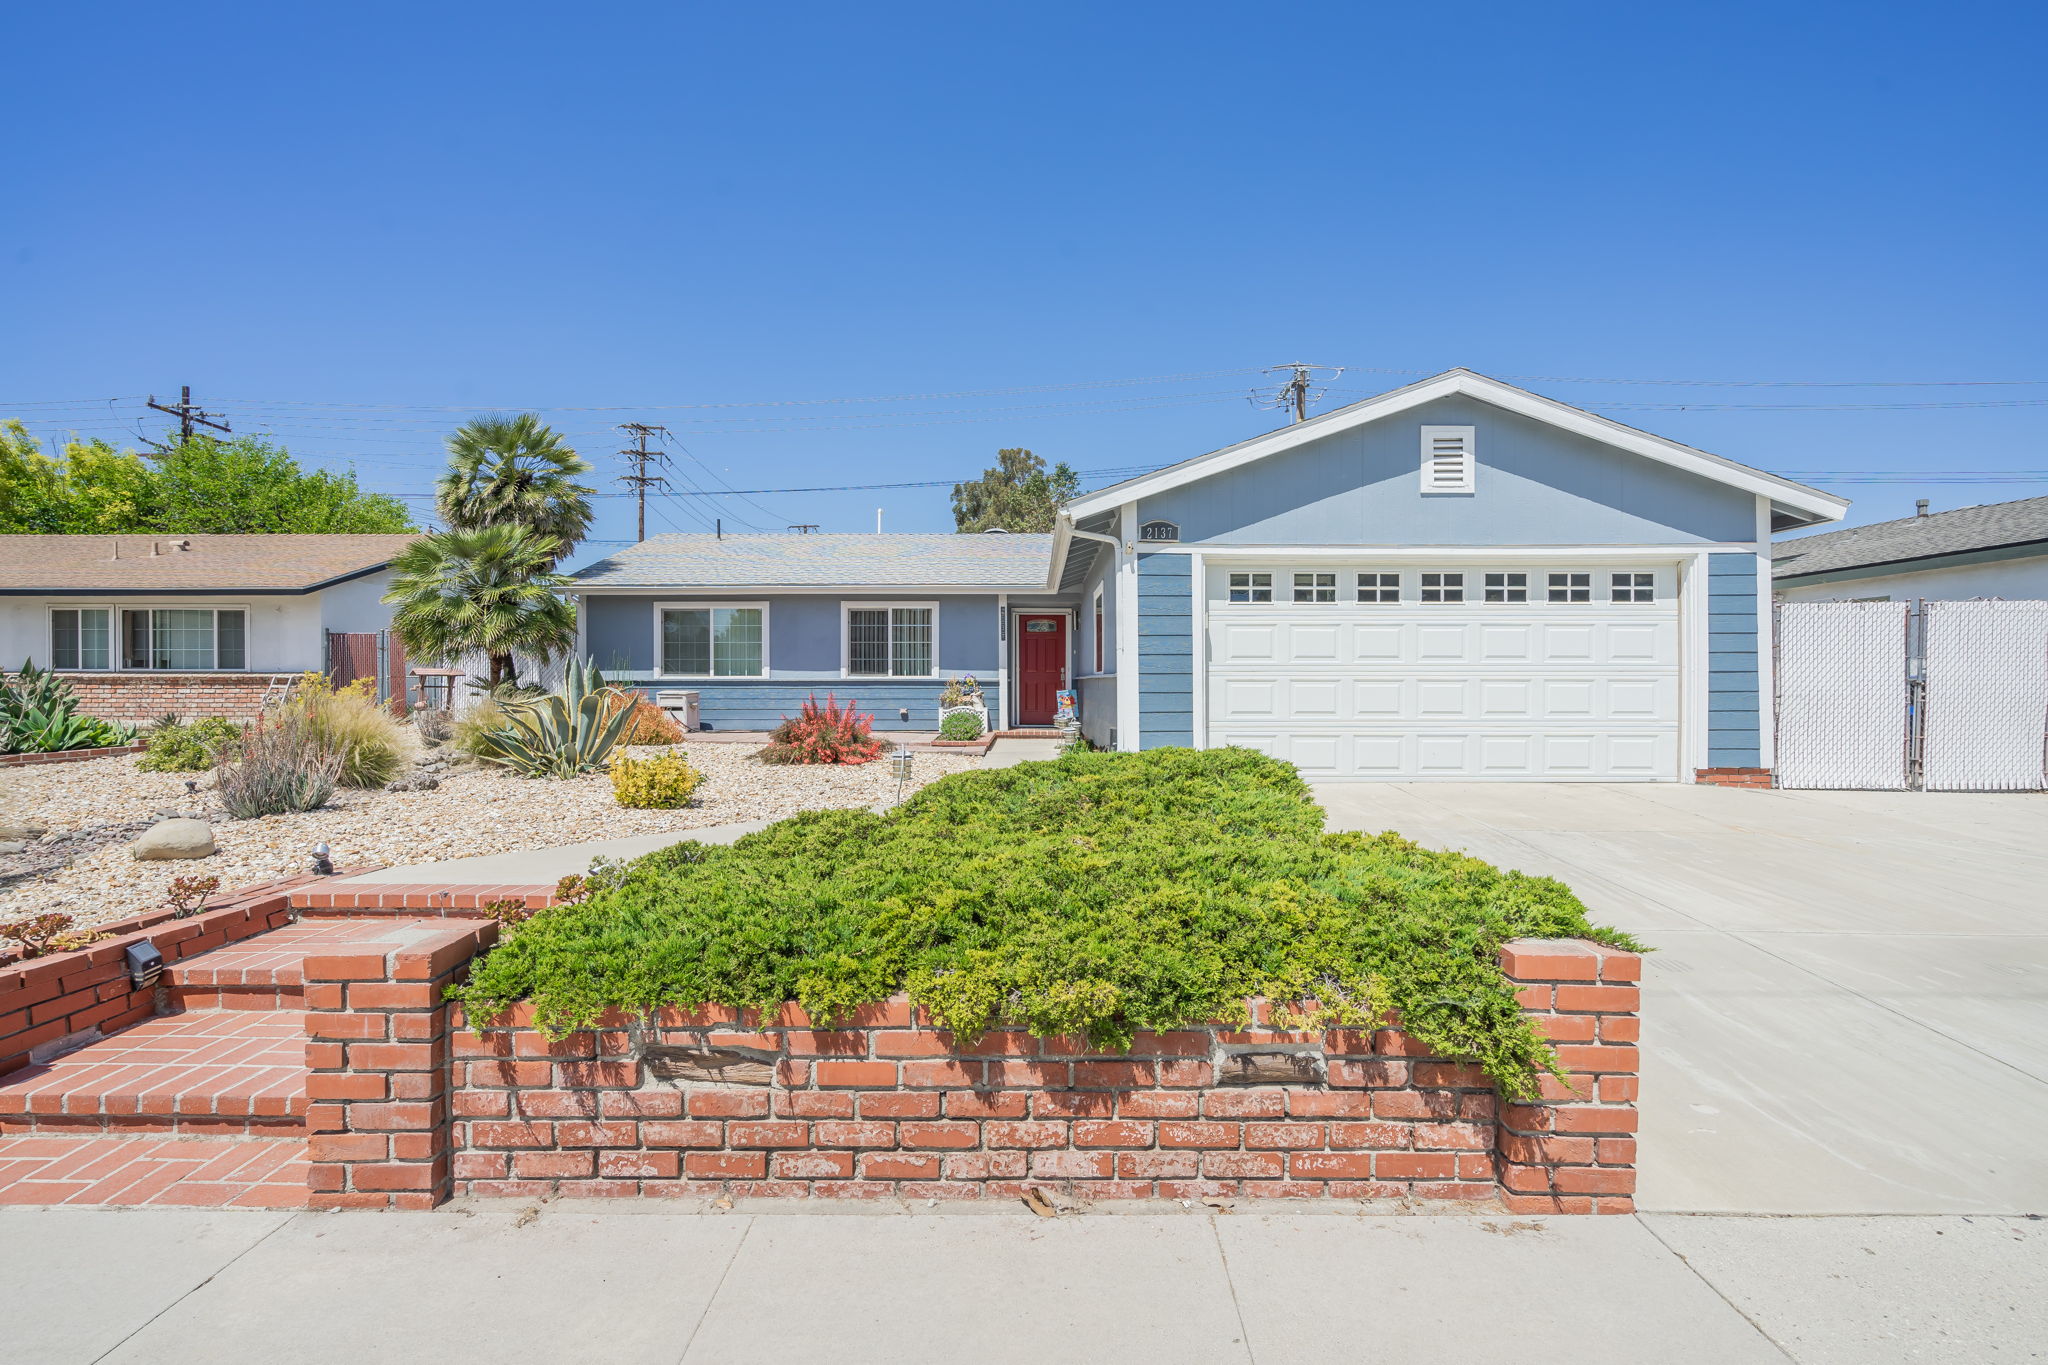  2137 Lysander Ave, Simi Valley, CA 93065, US